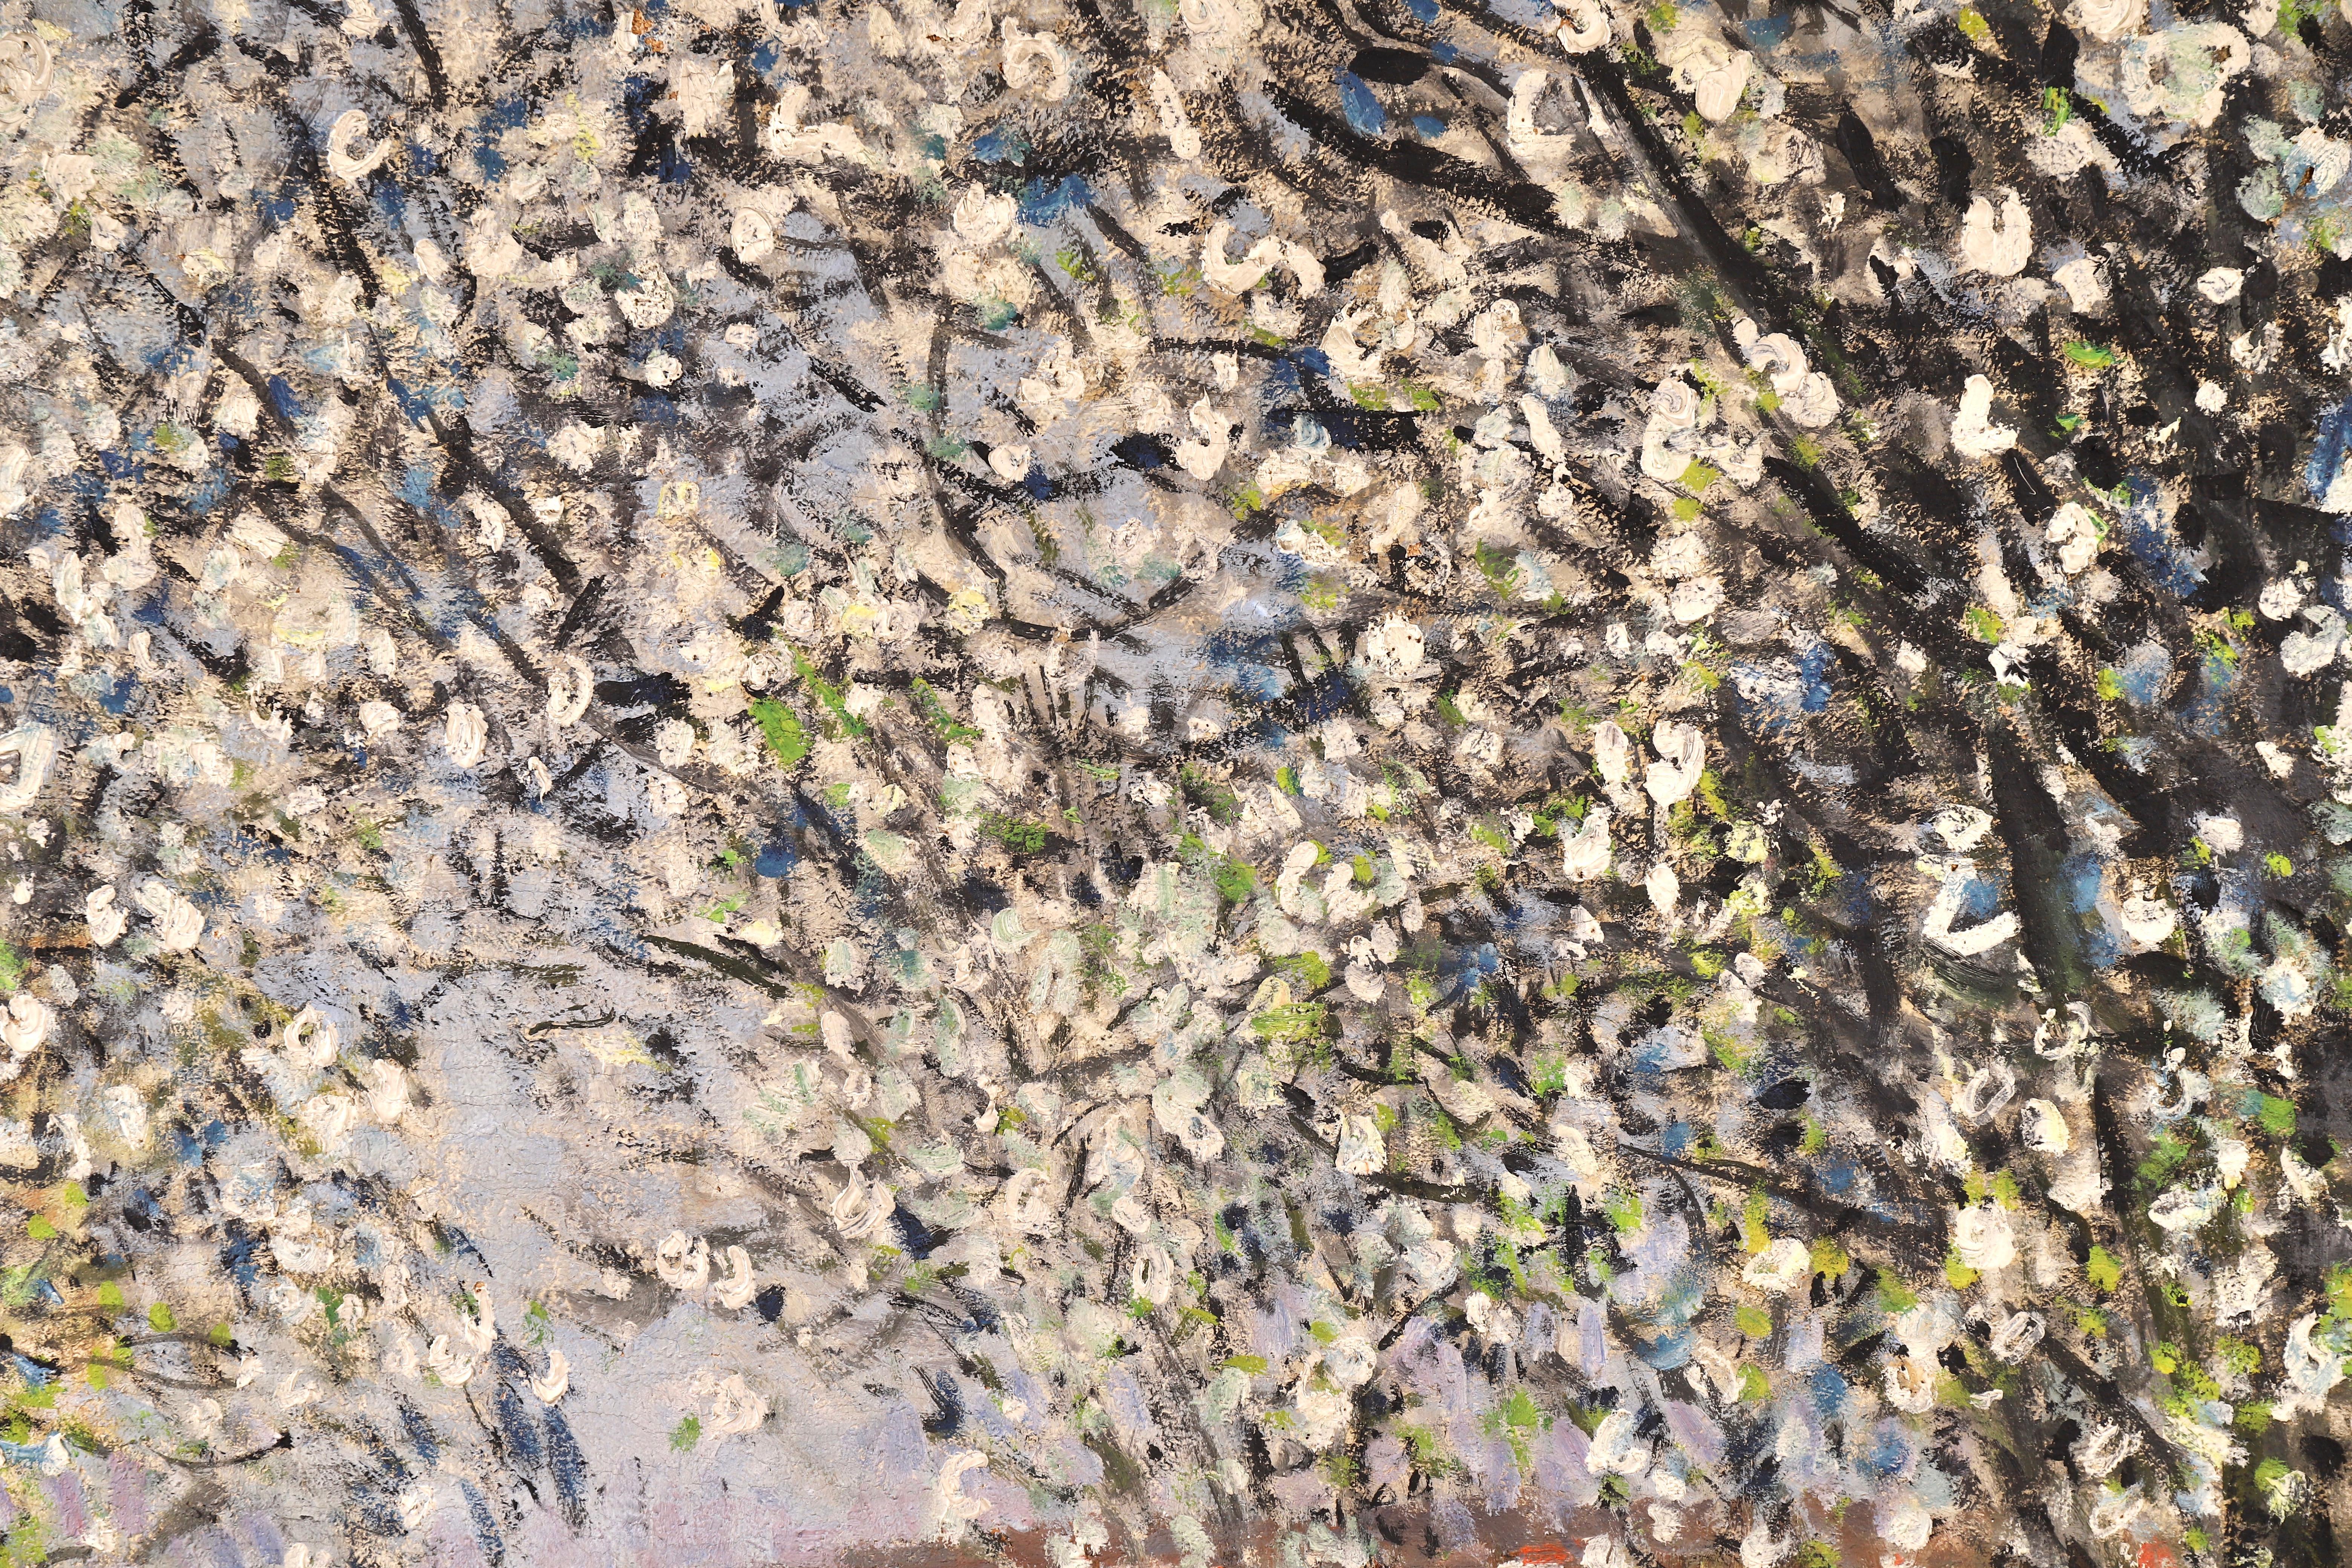 A stunning oil on canvas by French impressionist painter Pierre Eugene Montezin depicting a spring day. Ladies pick flowers at the water's edge beneath the blossom trees with blue skies in the distance. This work is recorded in the archives of the